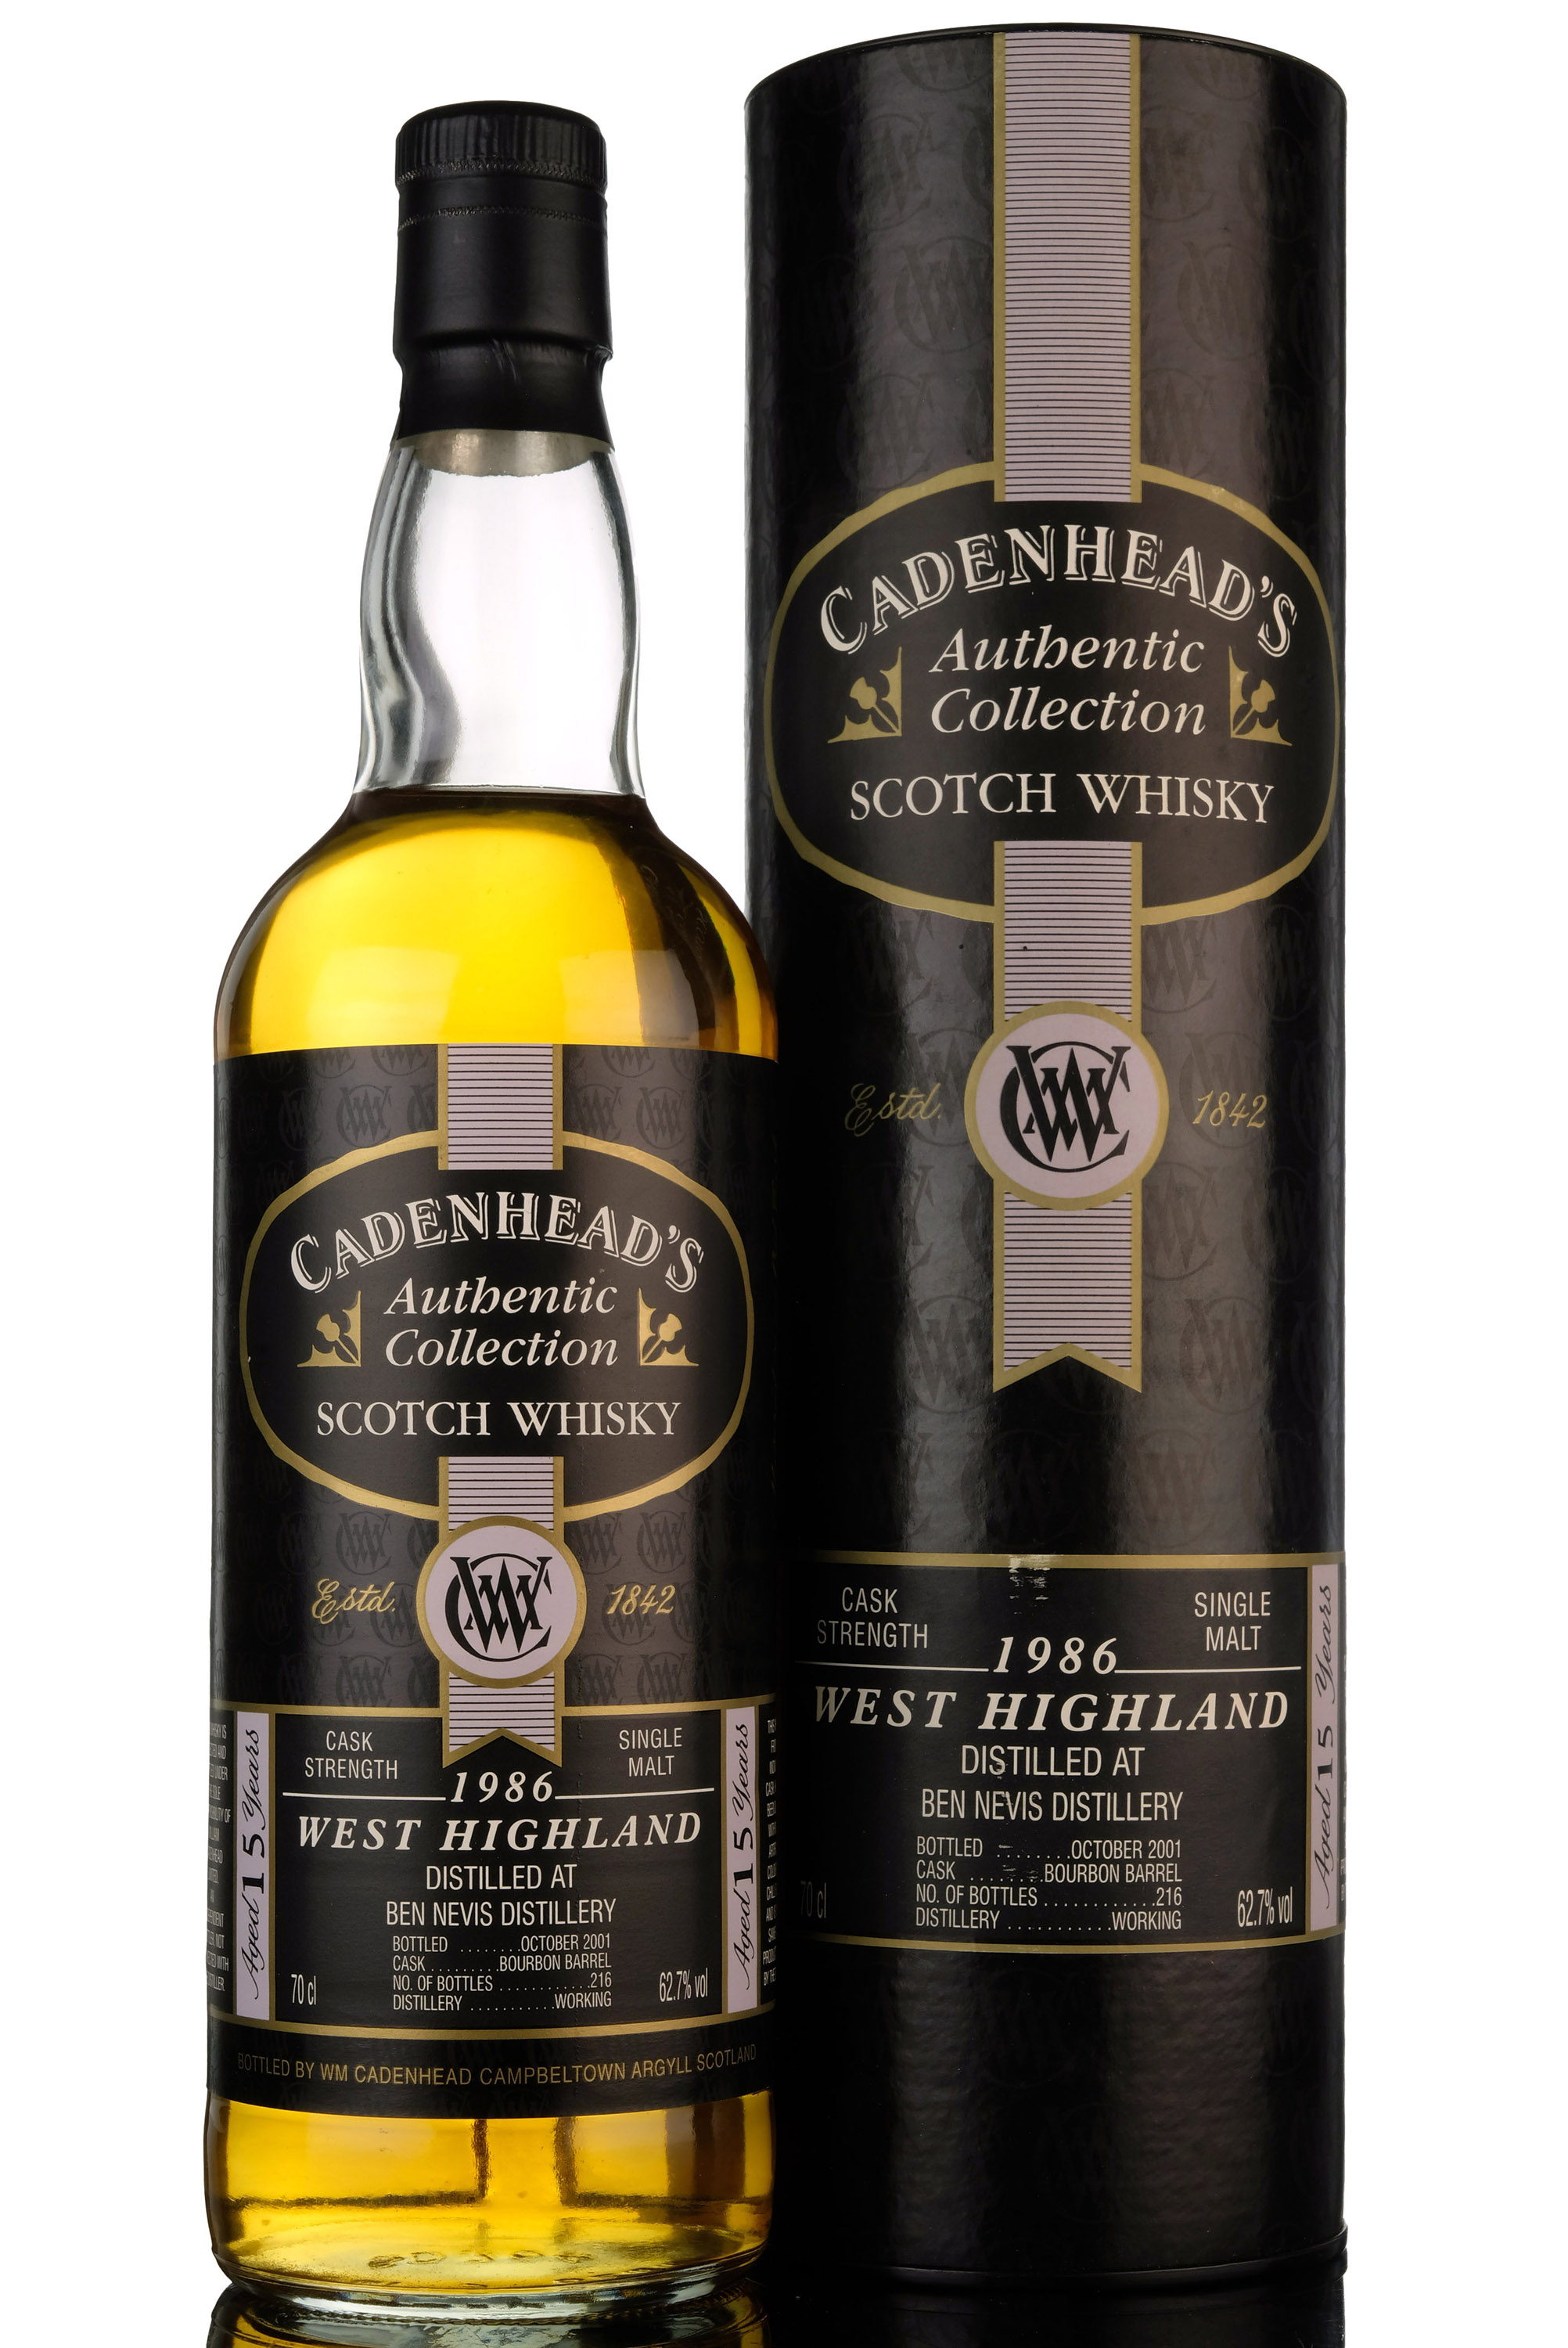 Ben Nevis 1986-2001 - 15 Year Old - Cadenheads Authentic Collection - Single Cask